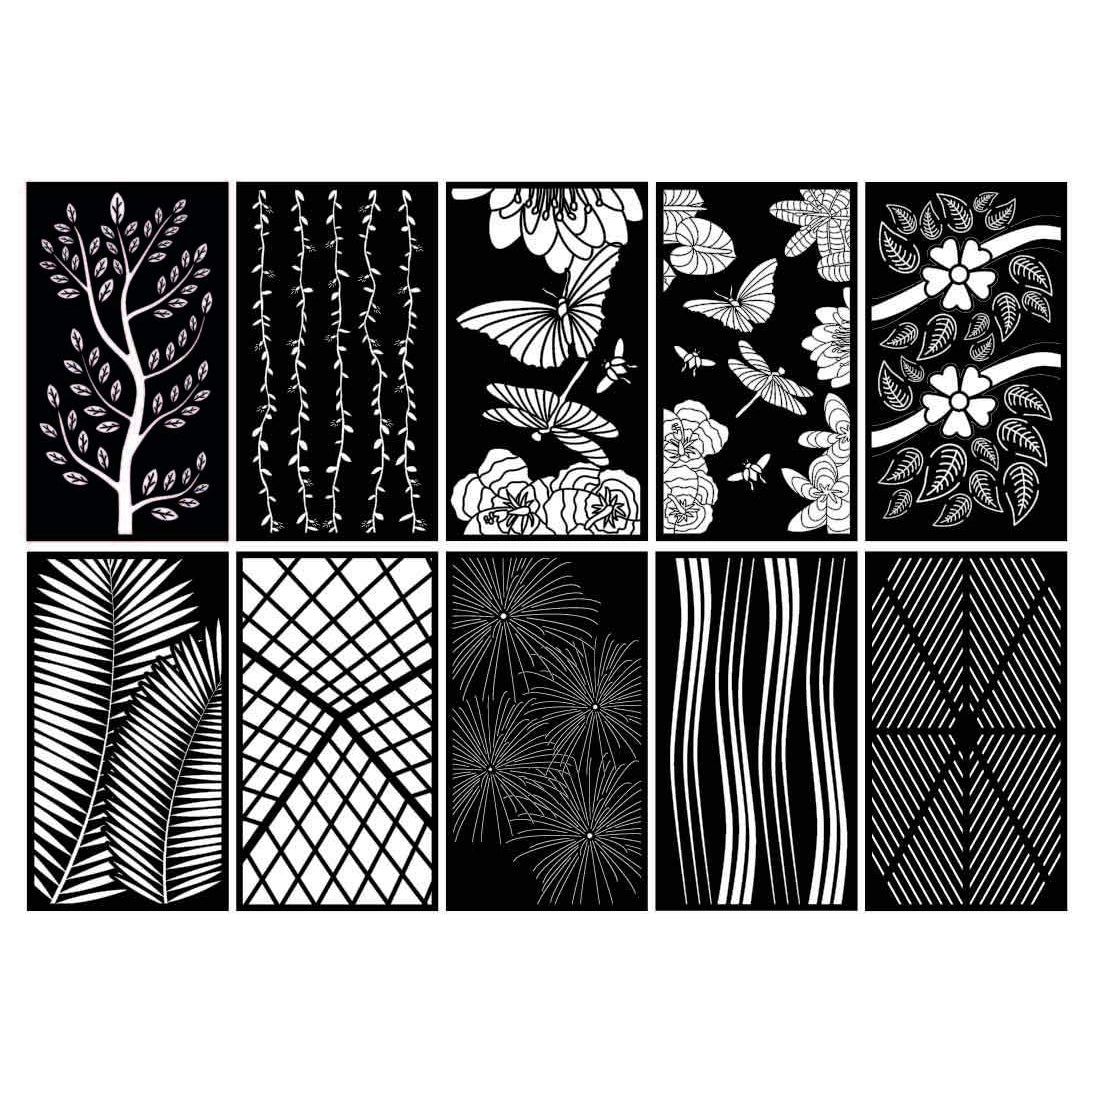 Abstract and Floral Decorative Privacy Screen Panels or Fence-dxf files cut ready